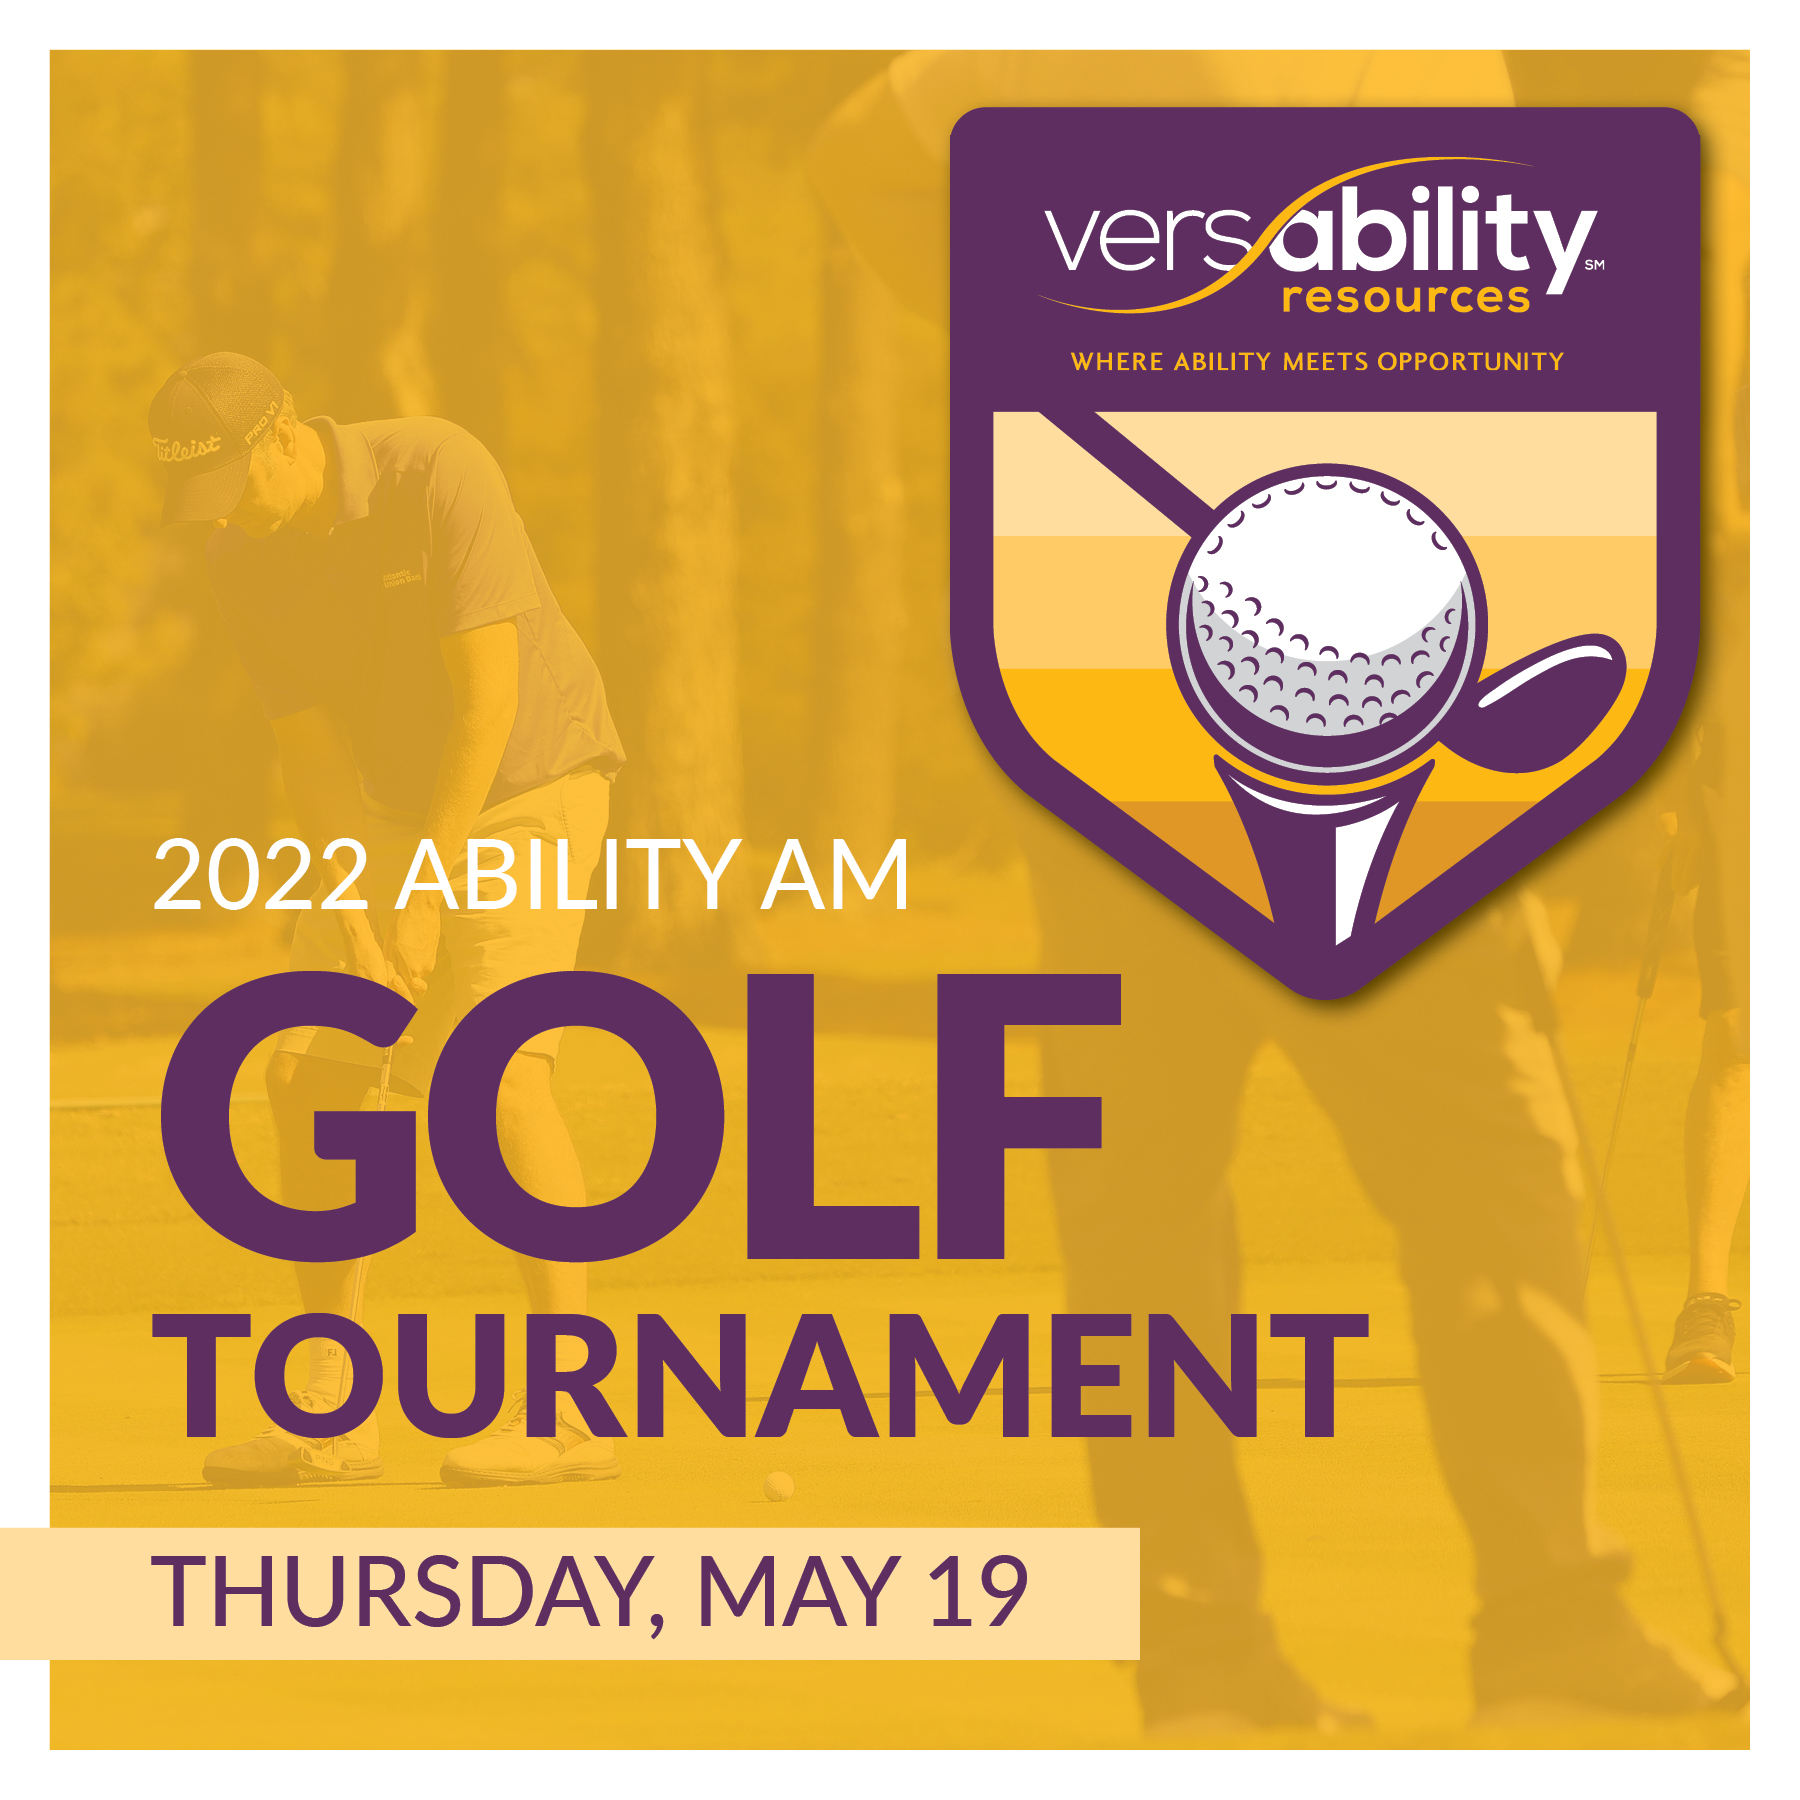 VersAbility Resources Seeking Sponsors and Golfers for May Fundraiser